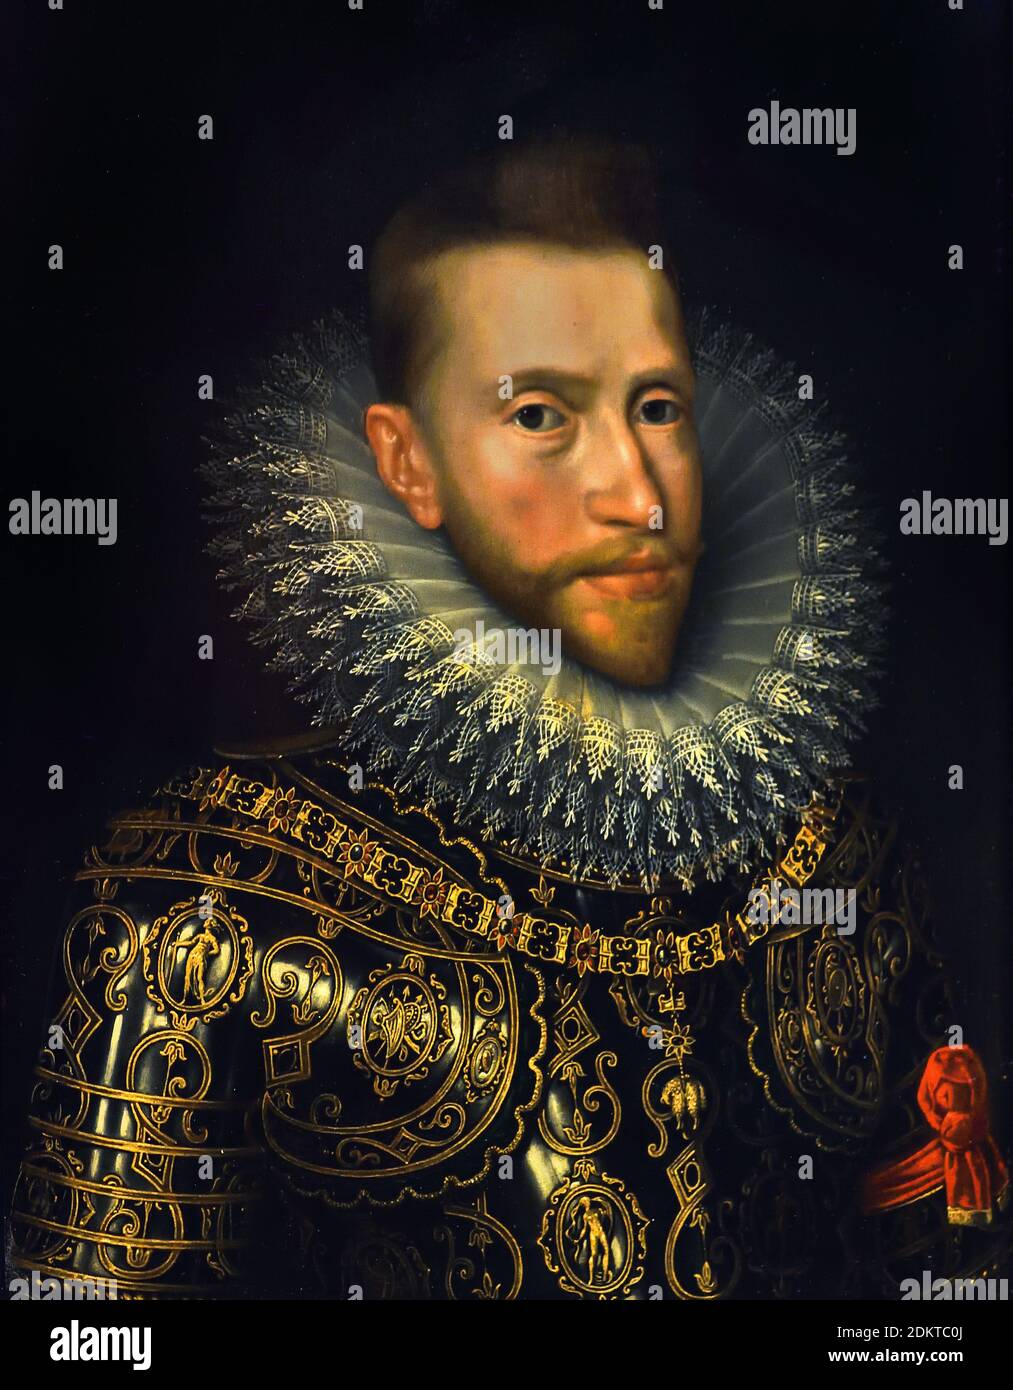 Archduke Albrecht VII by Workshop of Frans Pourbus II (1569-1622, (Albert VII 1559 - 1621) Archduke of Austria for a few months in 1619 and, jointly with his wife, Isabella Clara Eugenia, sovereign of the Habsburg Netherlands between 1598 and 1621. Prior to this, he had been a cardinal, archbishop of Toledo, viceroy of Portugal and Governor General of the Habsburg Netherlands. Holland Belgium, Low Lands, Stock Photo